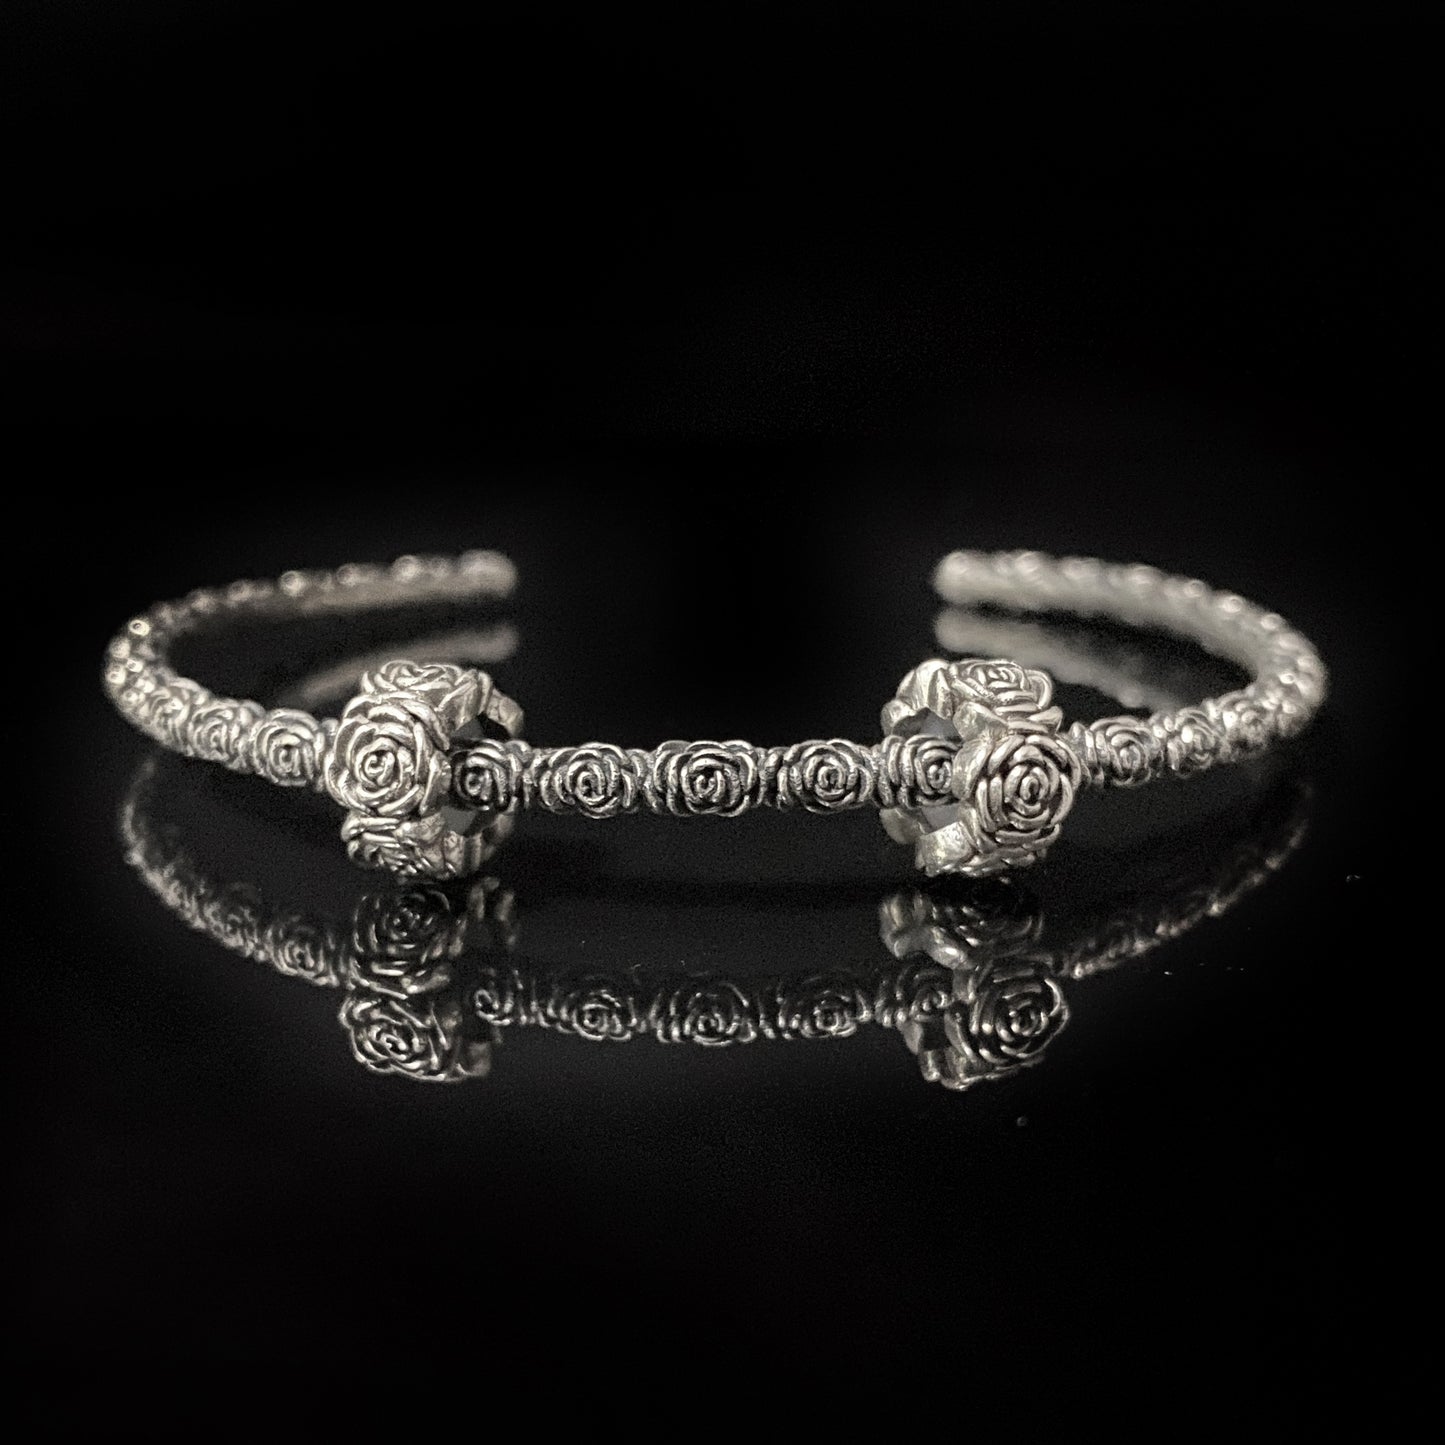 Meticulously crafted rose bangle bracelet.